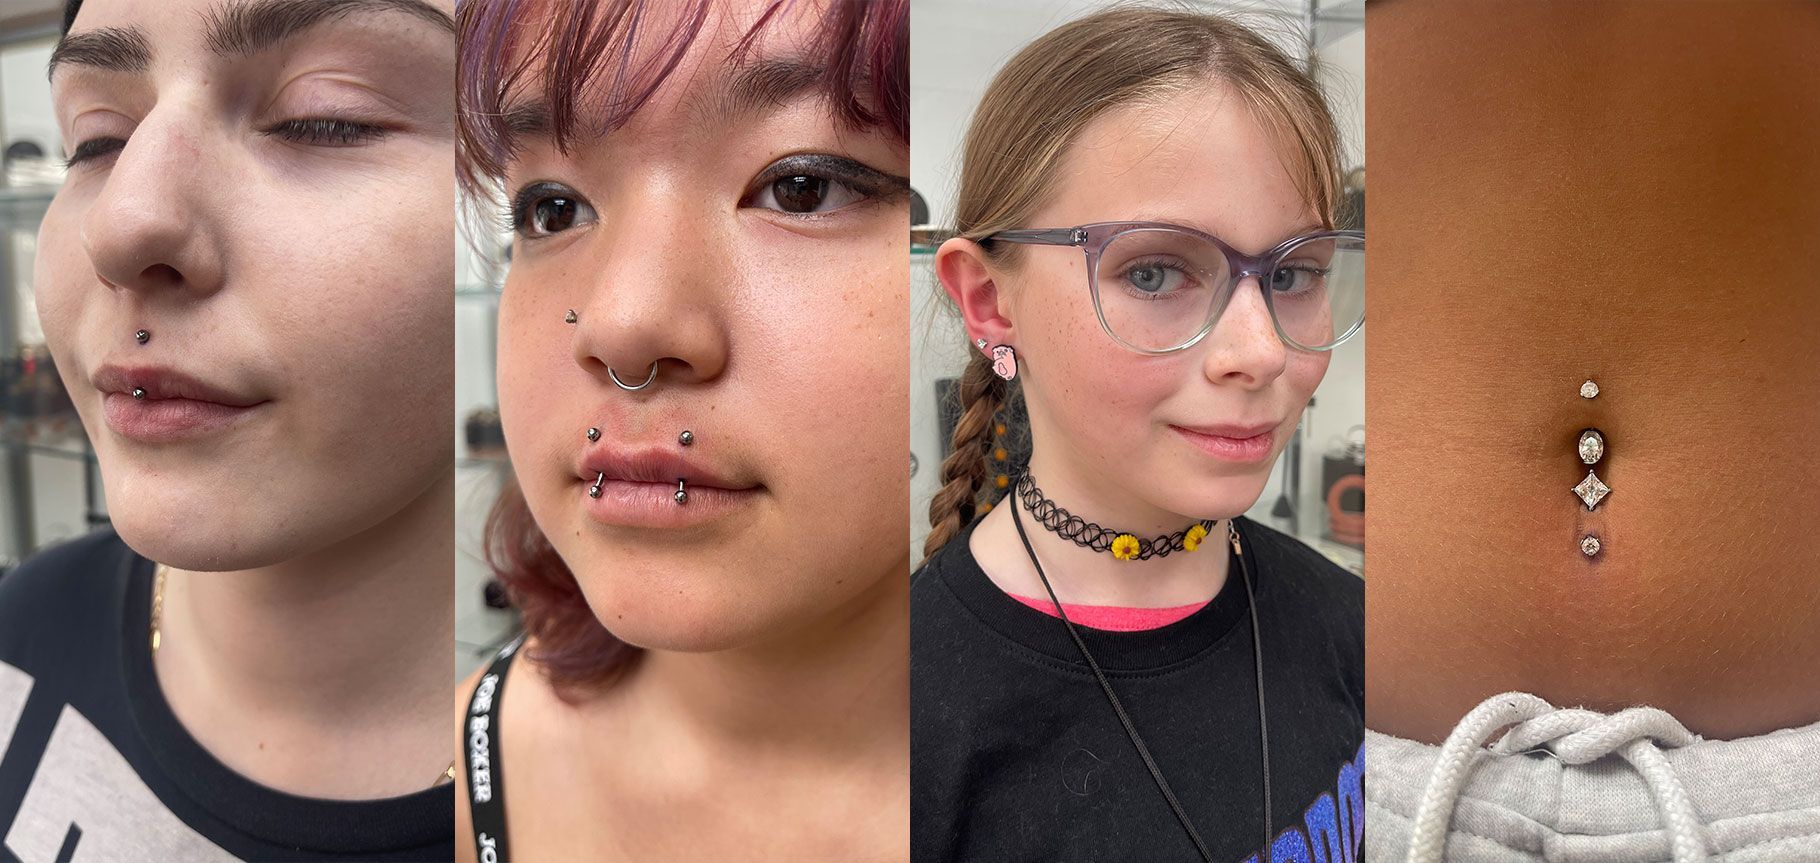 A collage of four pictures of different piercings on faces and belly